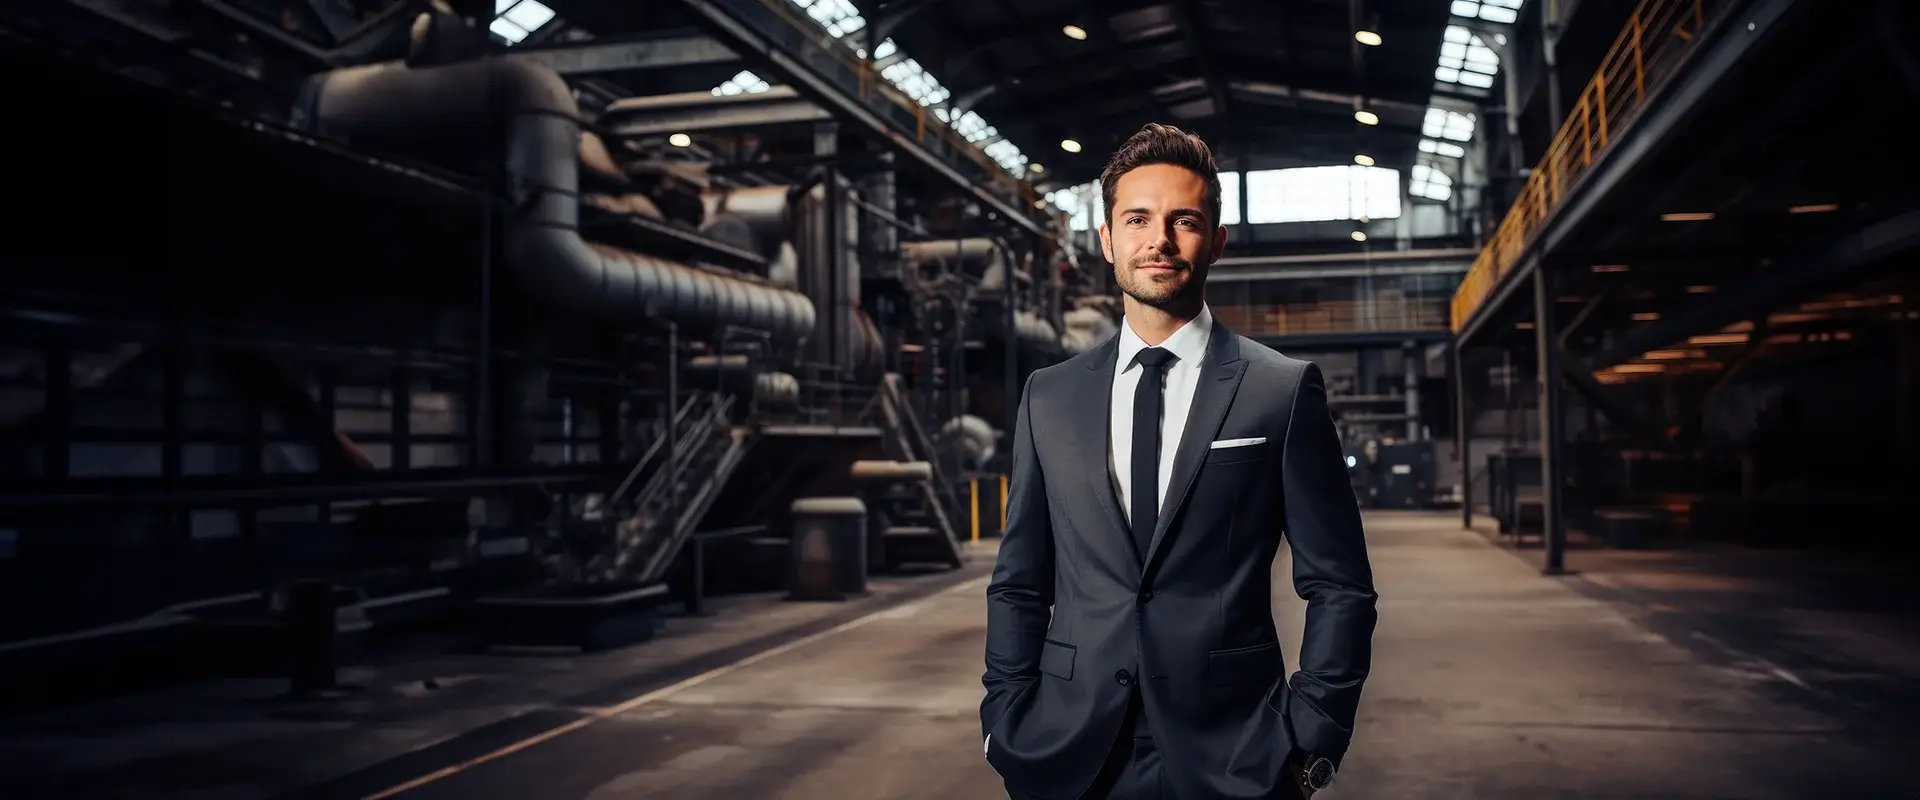 Businessman in a suit and a tie posing in a steel plant